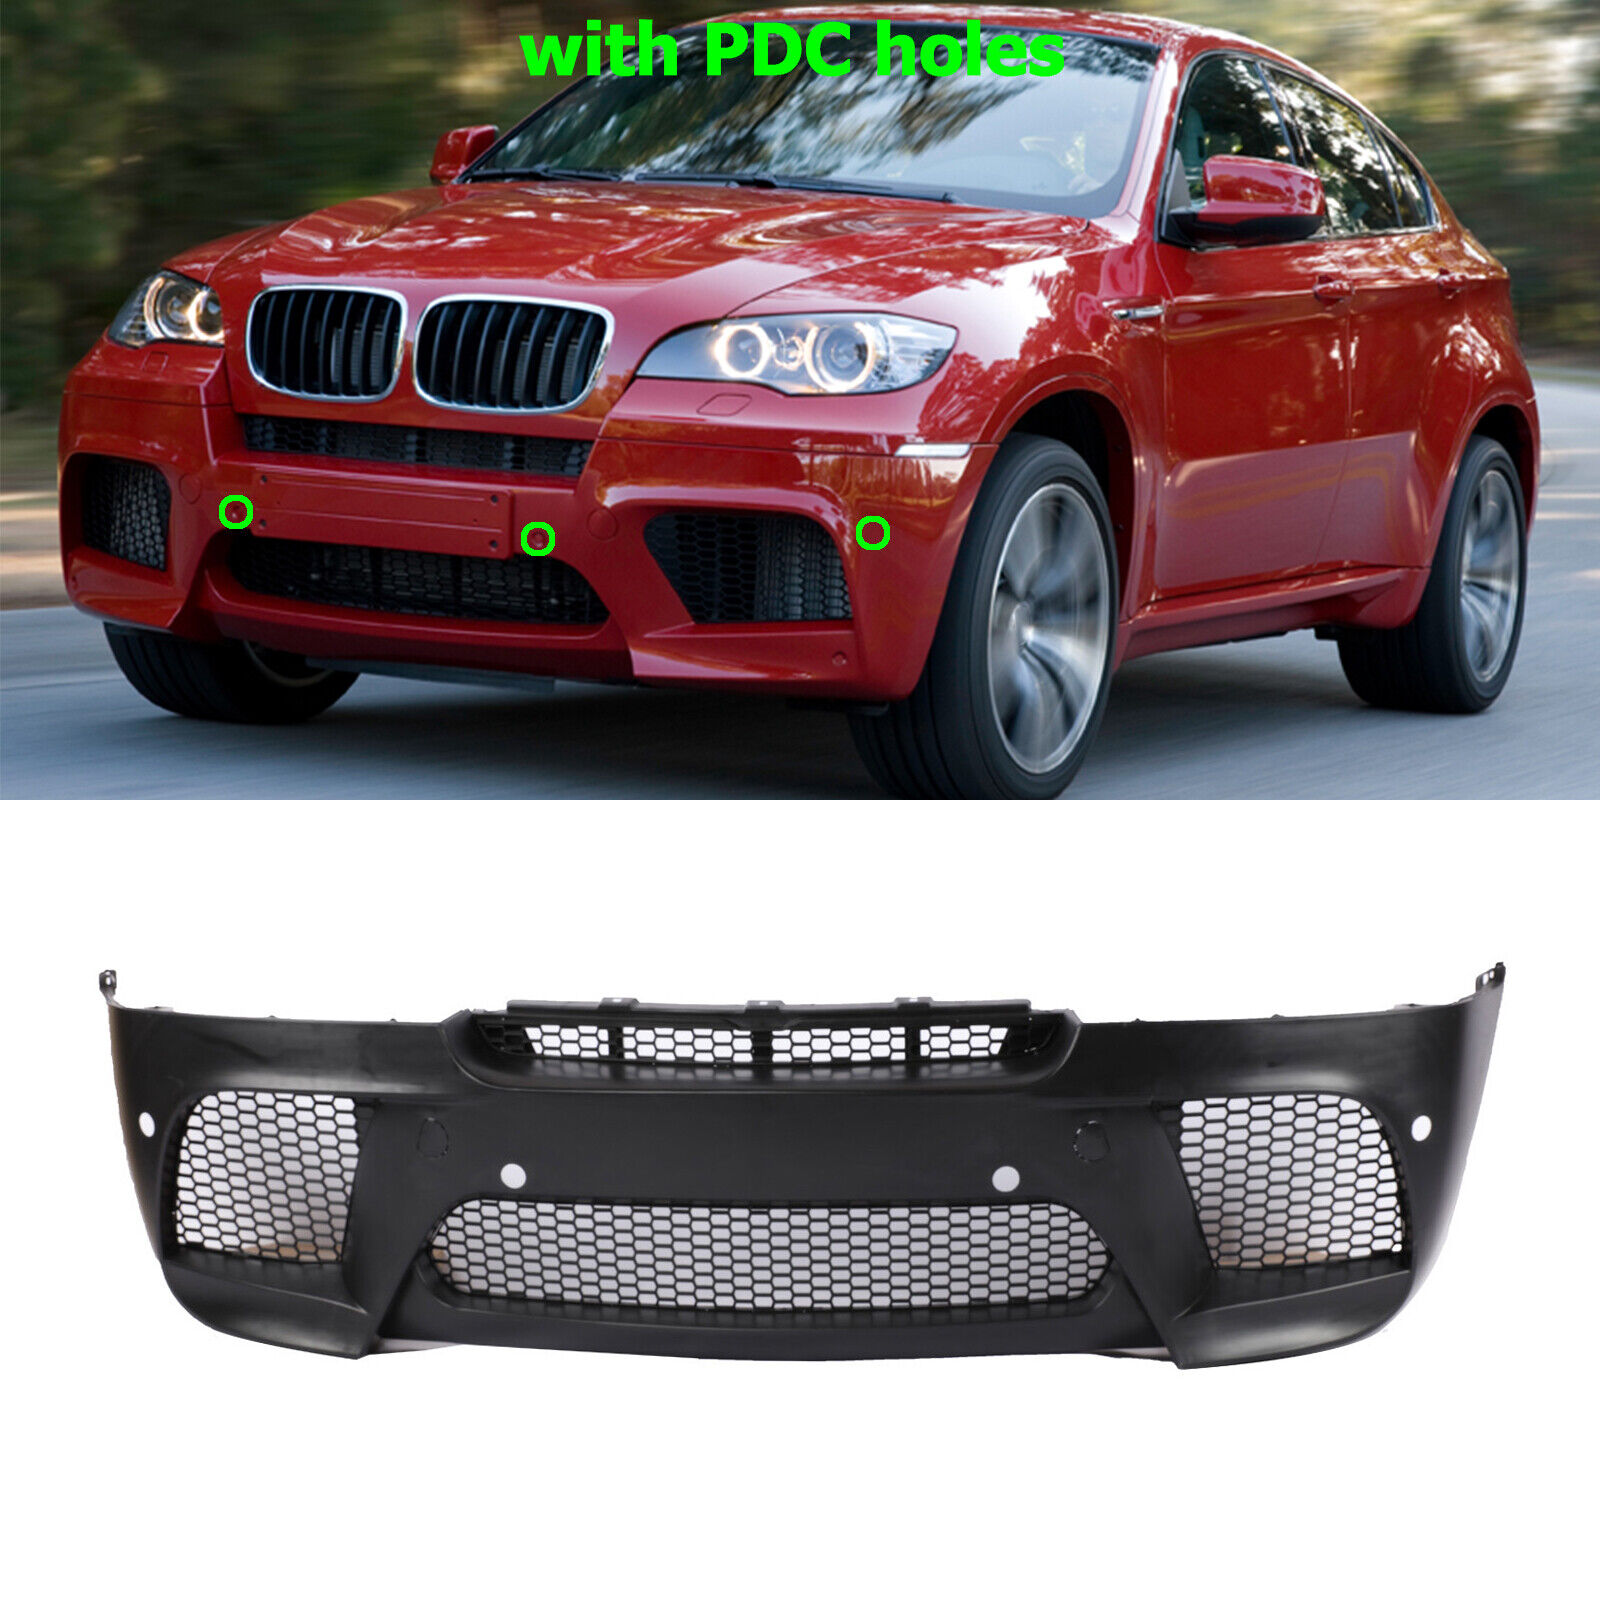 X6 M Performance Style Front Bumper For BMW E71 X6 2007-2014 W/PDC Hoels